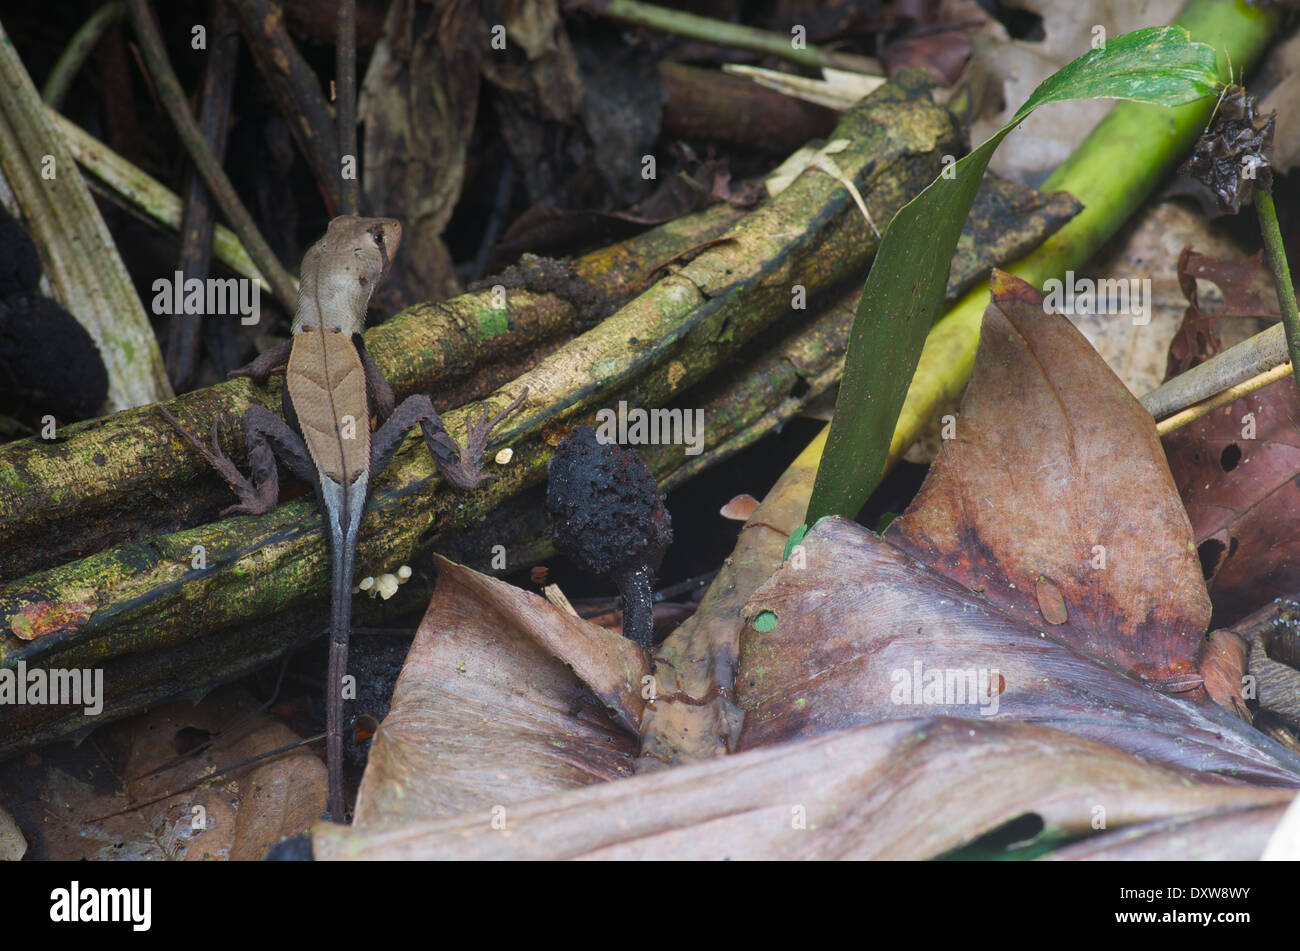 A Western Leaf Lizard (Stenocercus fimbriatus) camouflaged on the forest floor in the Amazon basin in Peru. Stock Photo